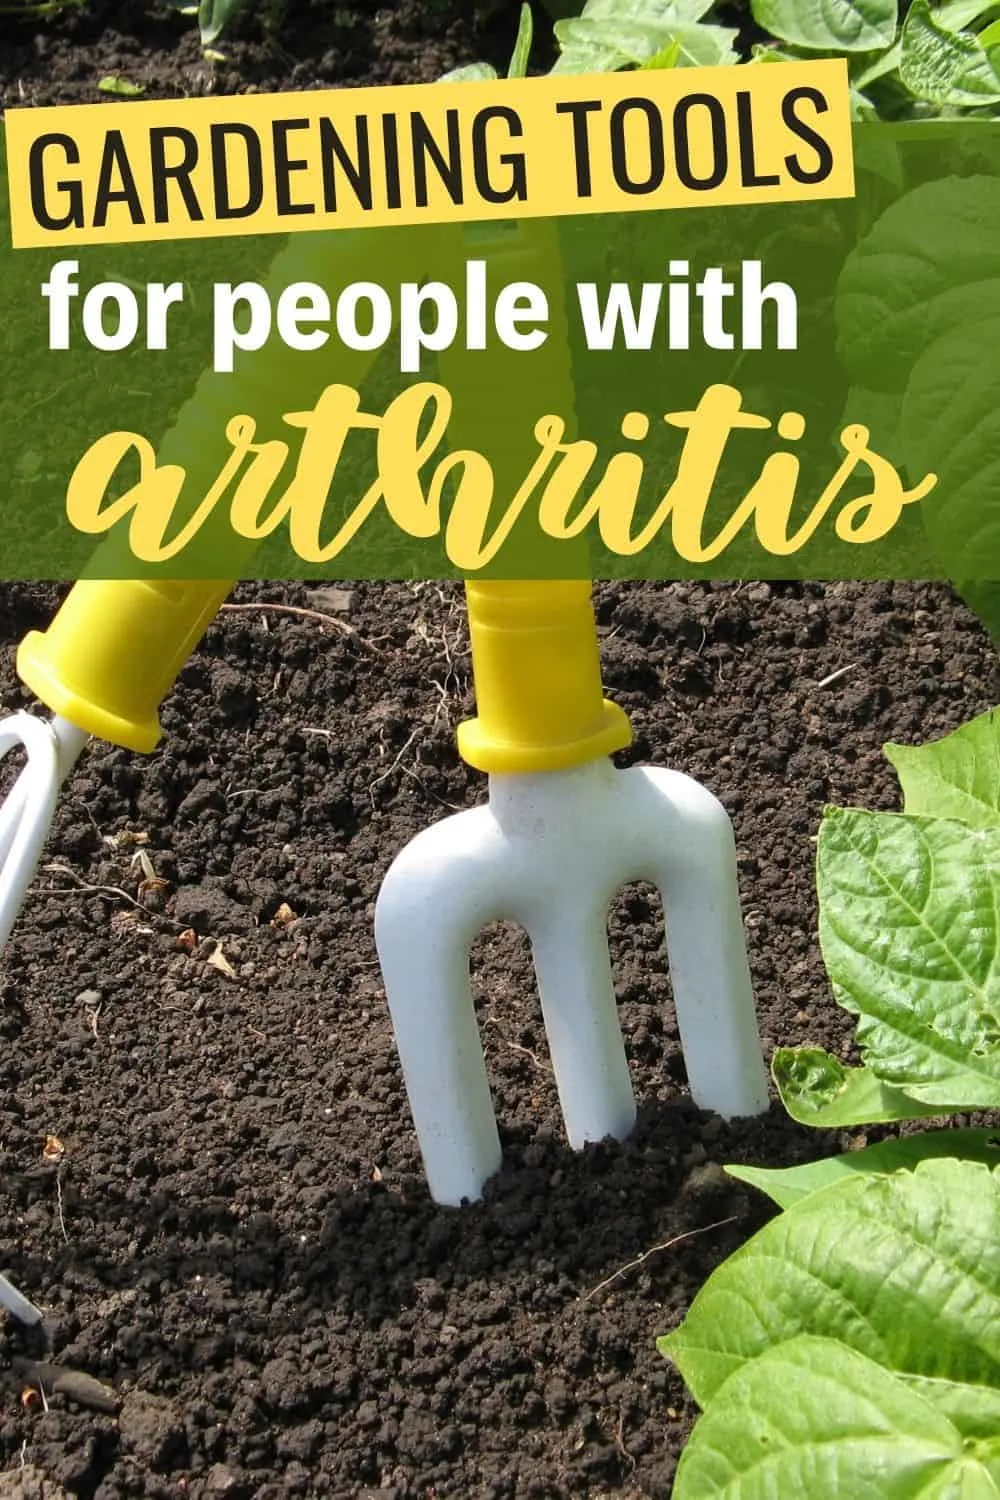 Gardening tools for people with arthritis